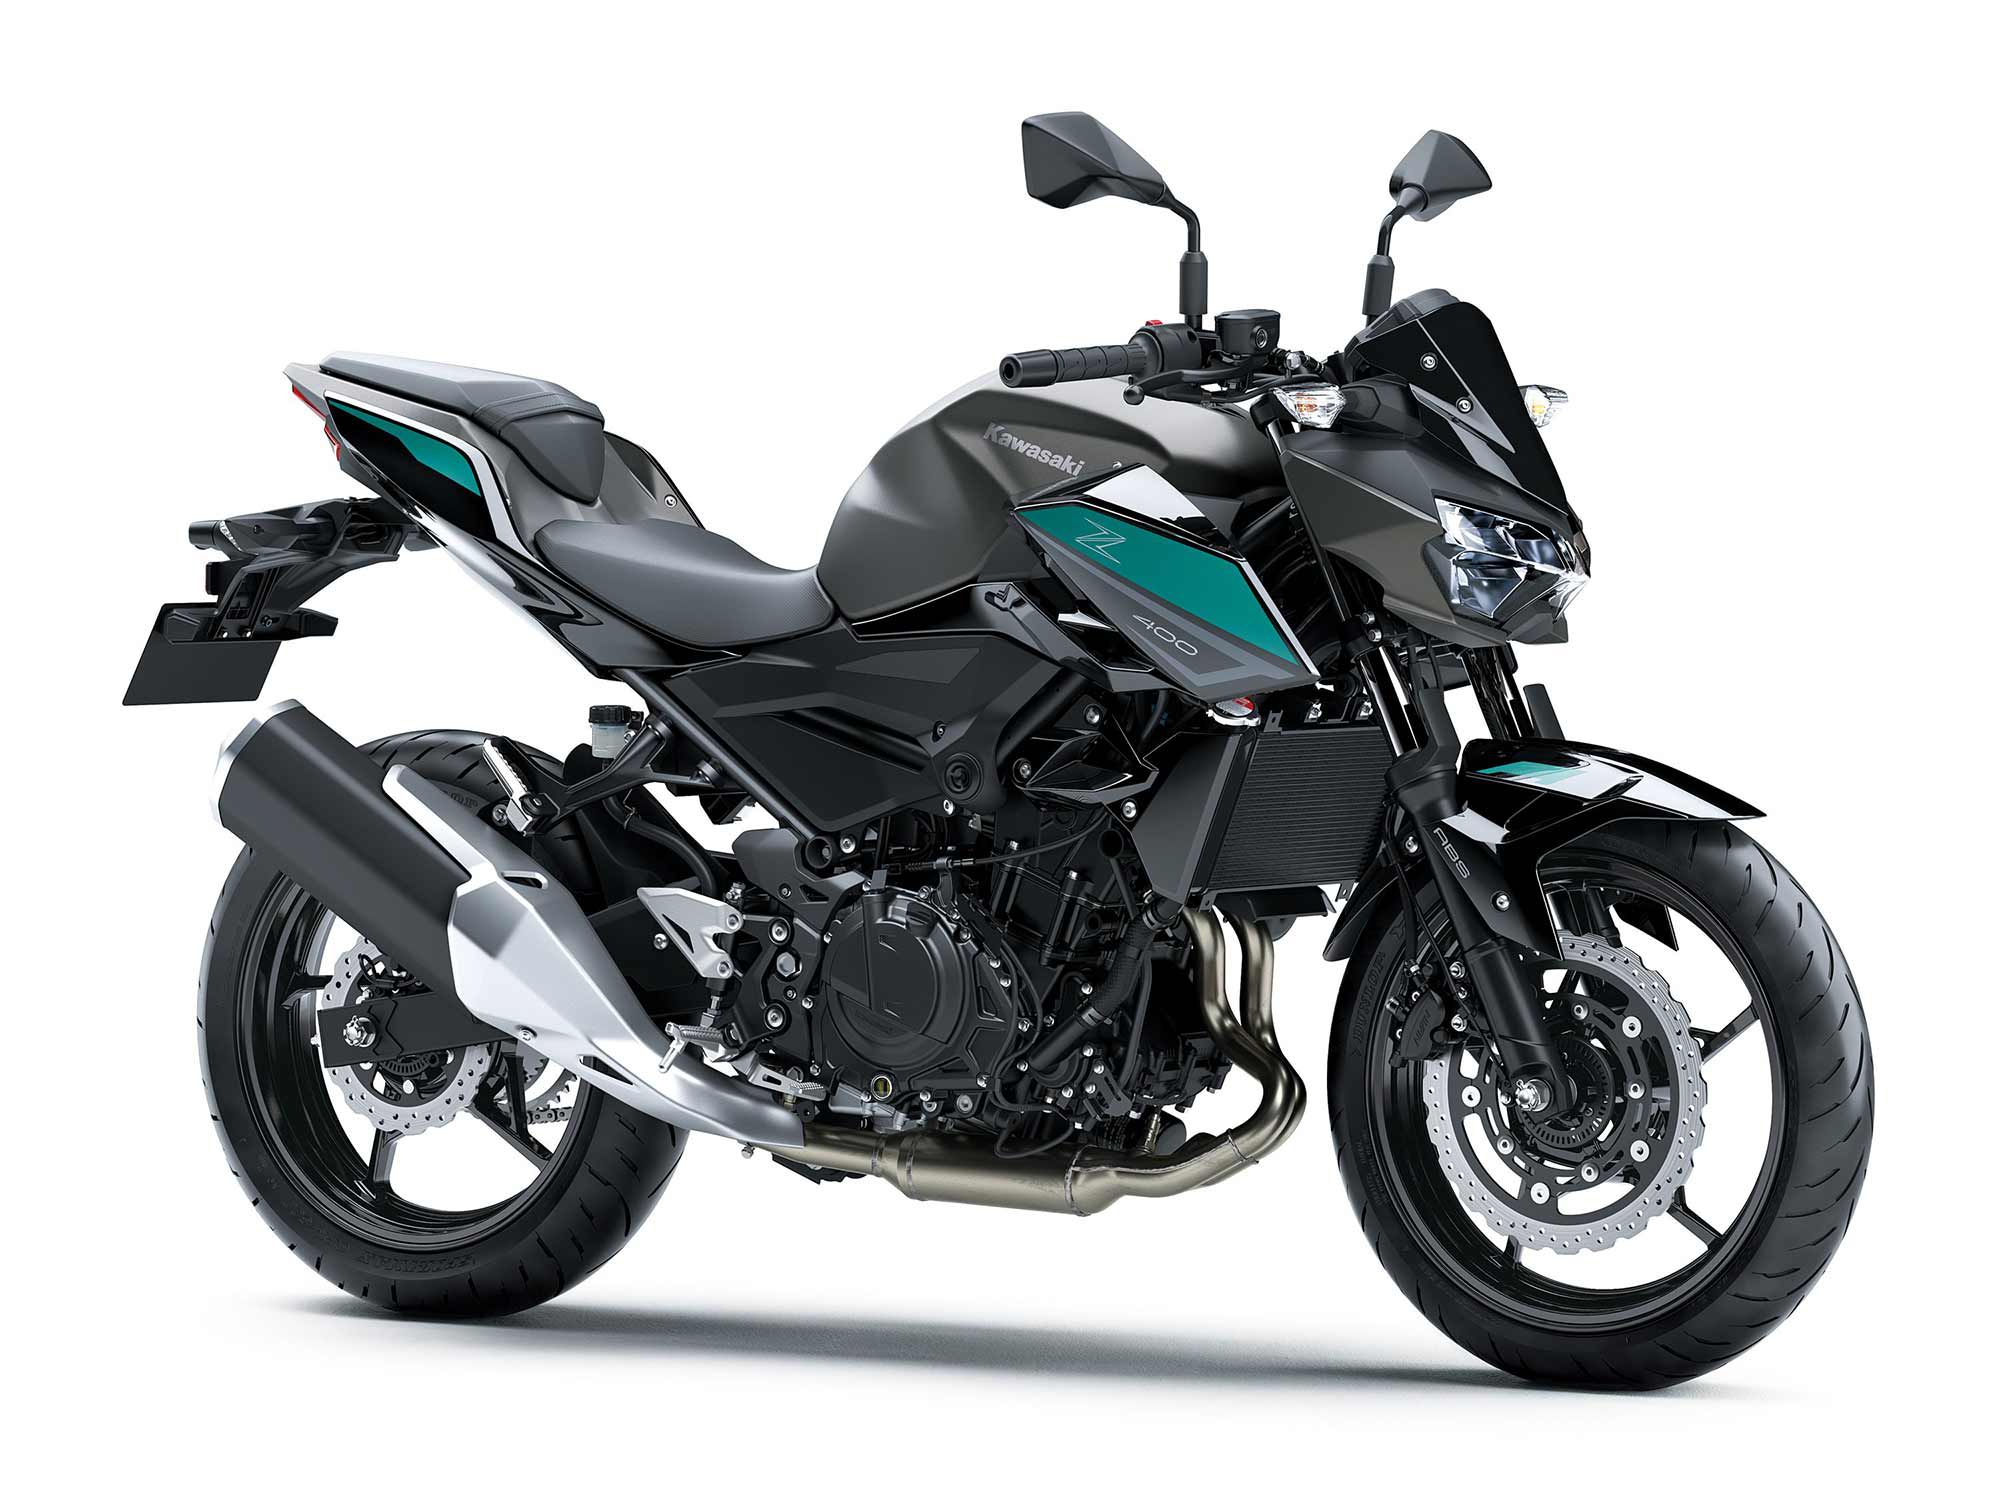 Low price, easy to ride, and engaging. The Z400 is a great value for many riders.